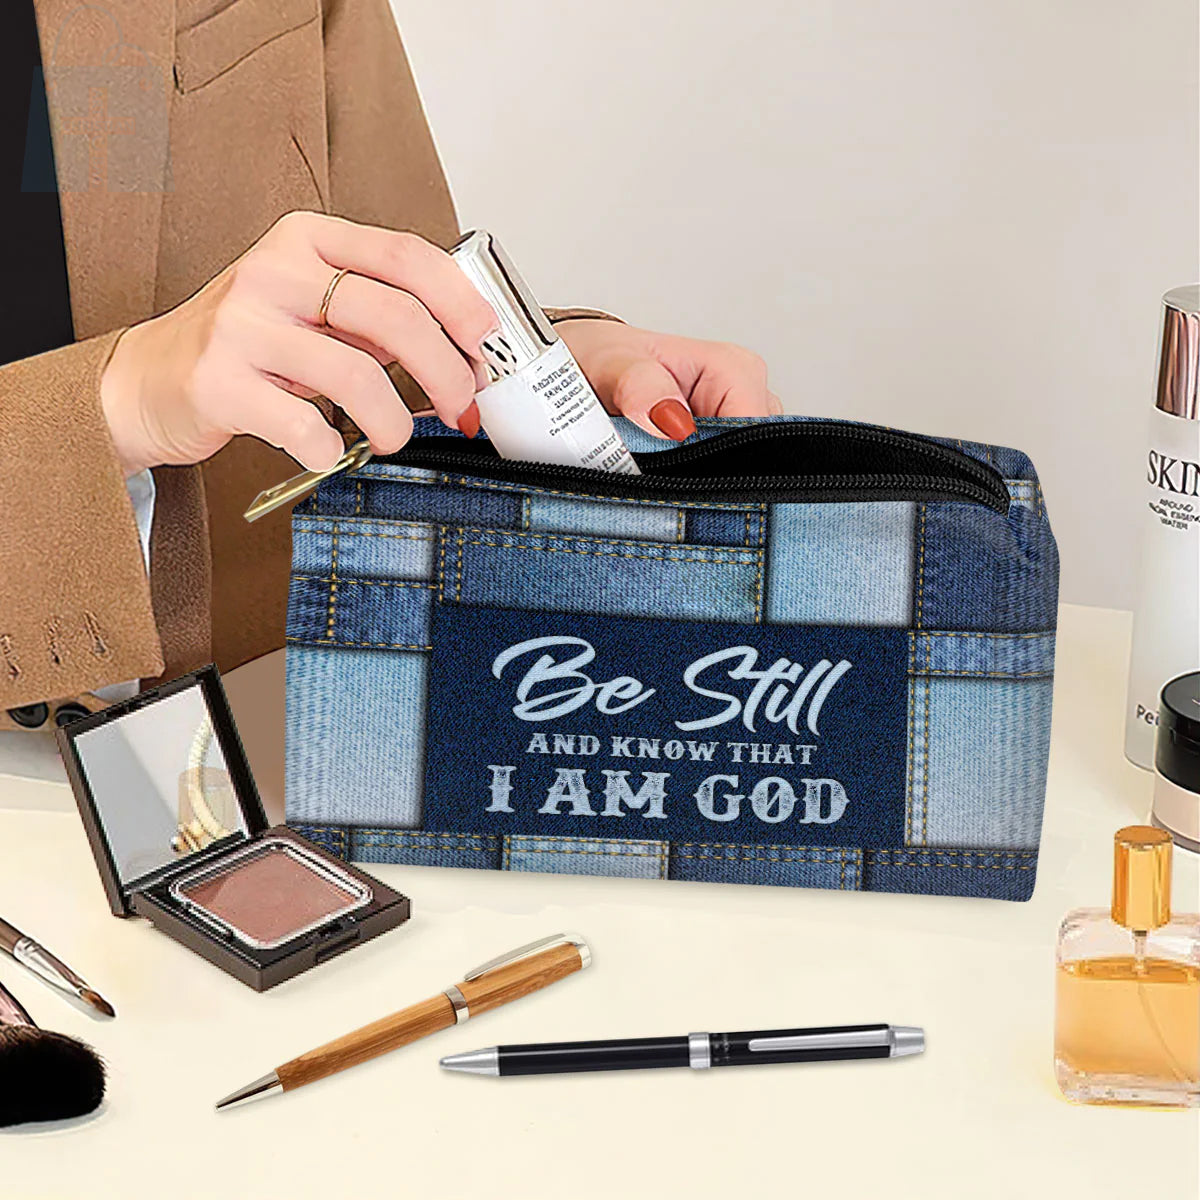 Christianartbag Makeup Cosmetic Bag, Be Still And Know That I Am God Christmas Gift, Personalized Leather Cosmetic Bag. - Christian Art Bag